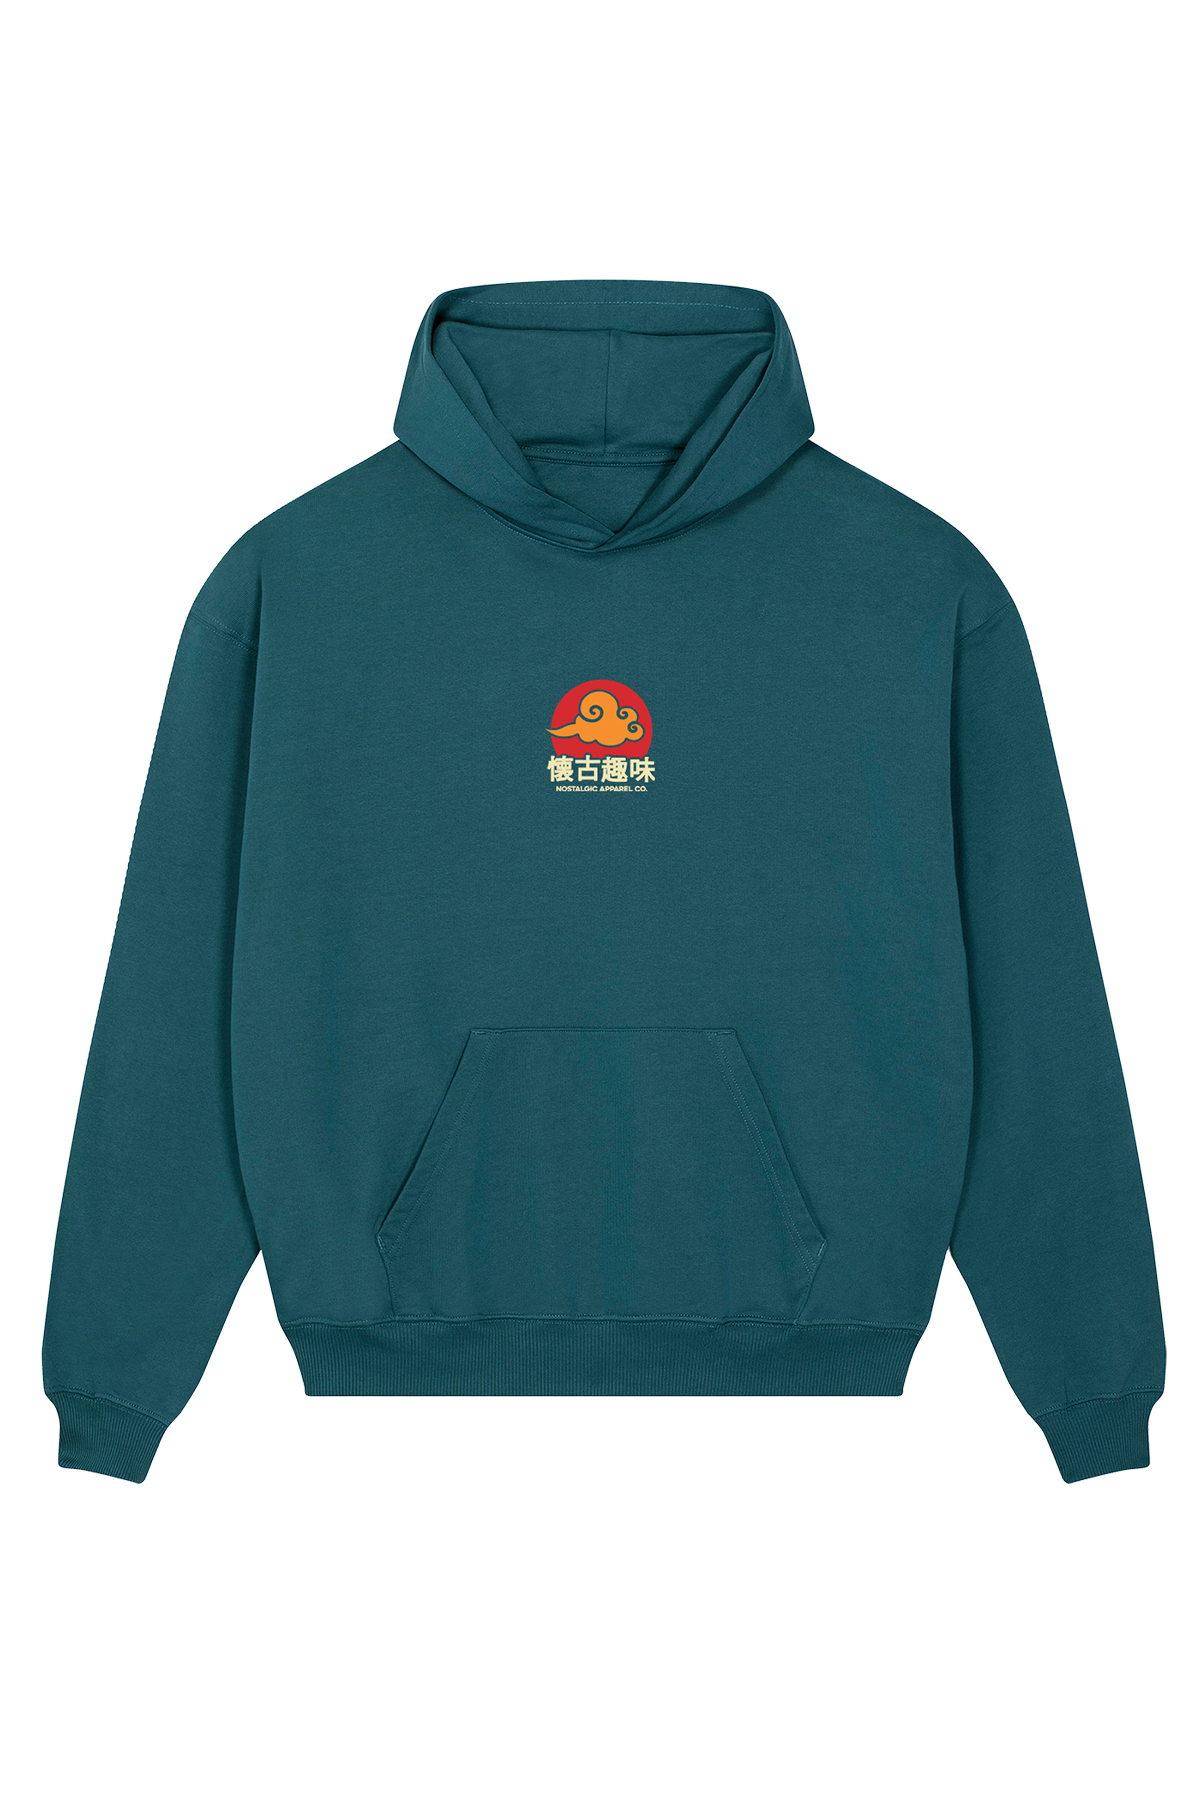 Never leave me | Oversized Hoodie